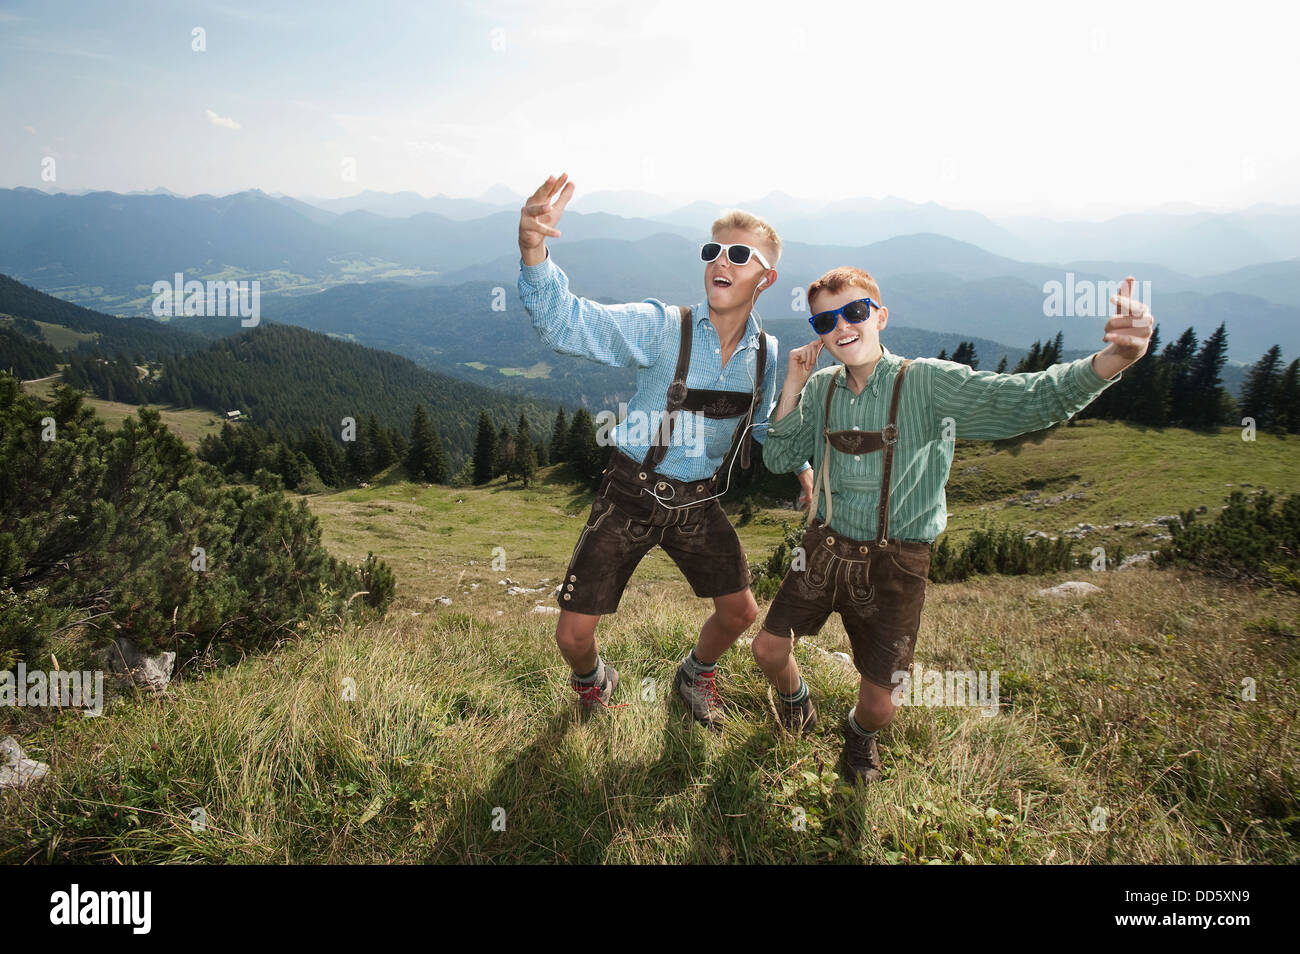 Germany, Bavaria, Two boys in traditional clothing fooling around in mountains Stock Photo